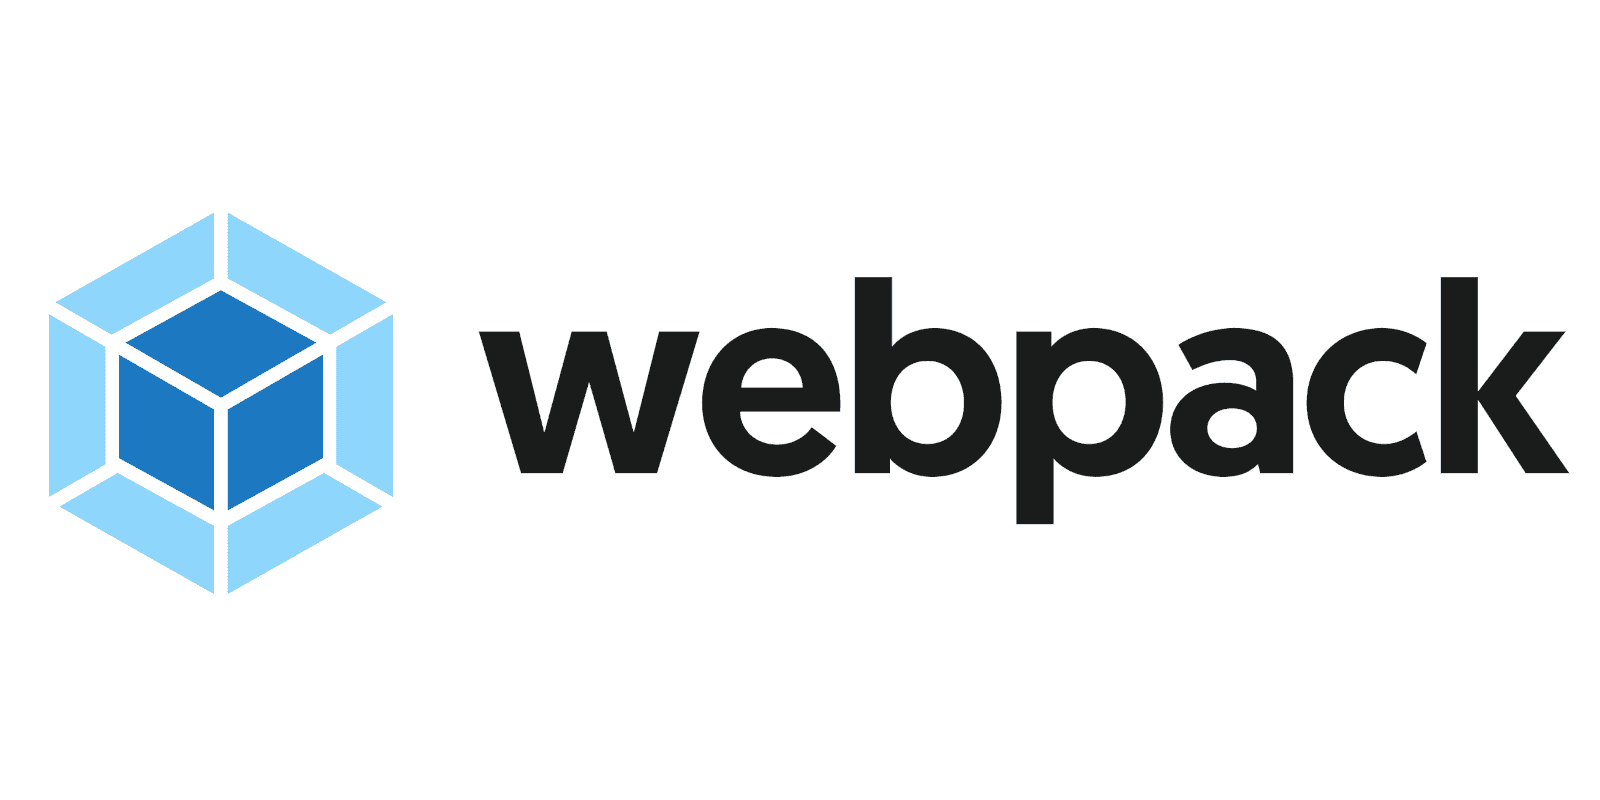 Getting started with Webpack